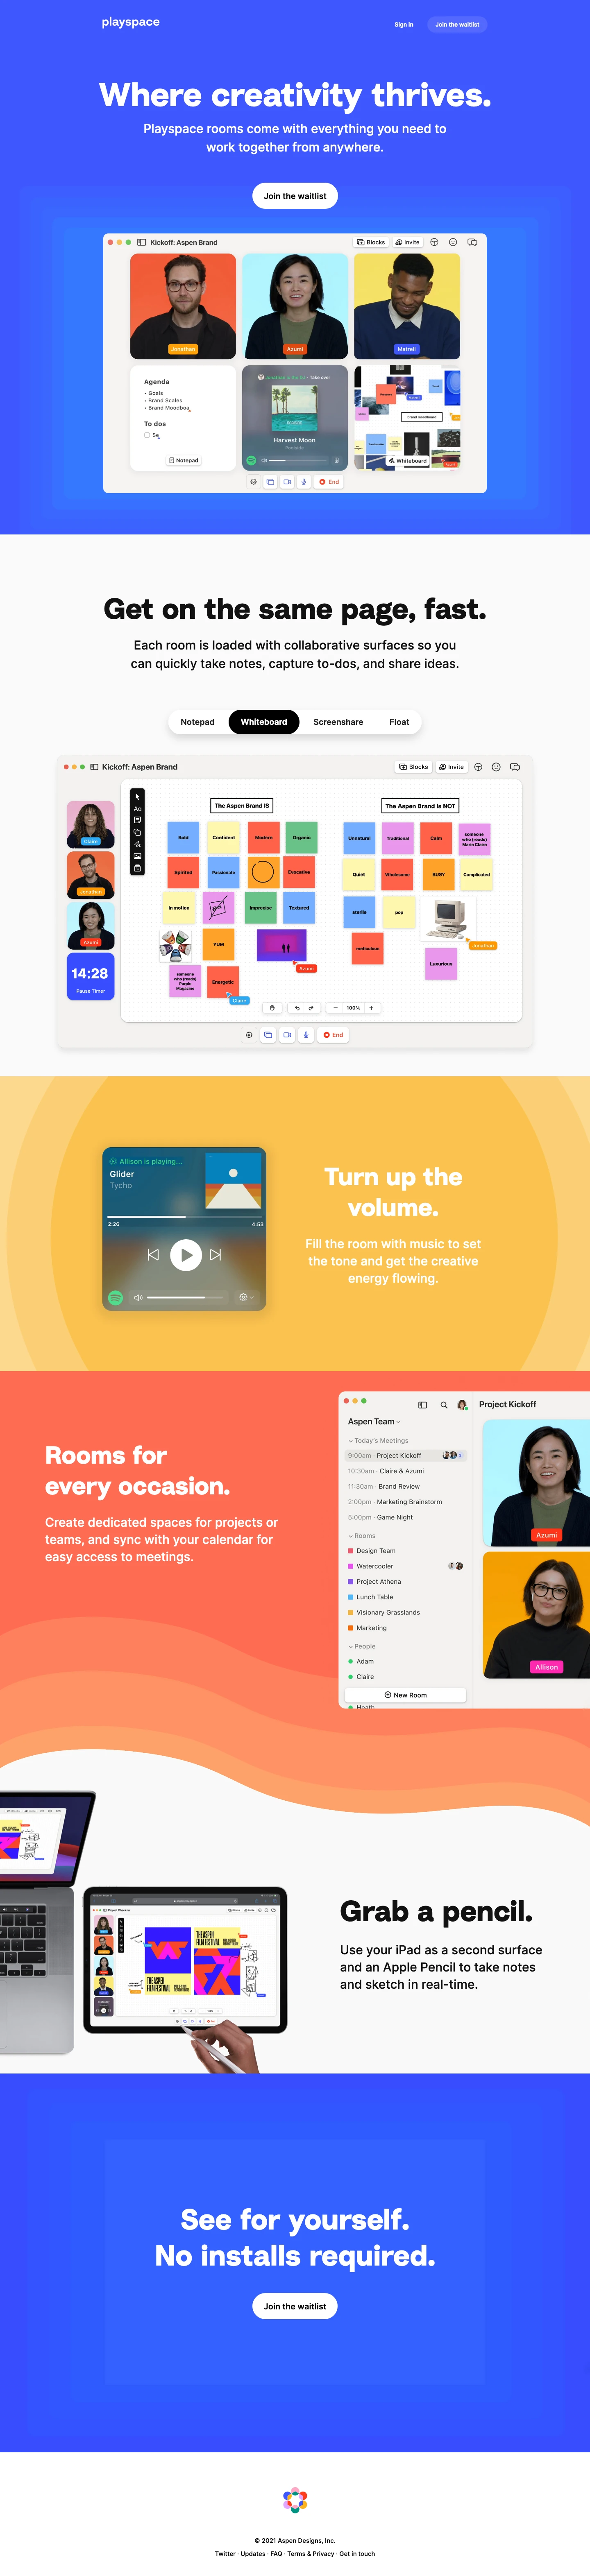 Playspace Landing Page Example: Virtual rooms that come with everything you need to work together: high-quality video alongside shared whiteboards, notepads and music.